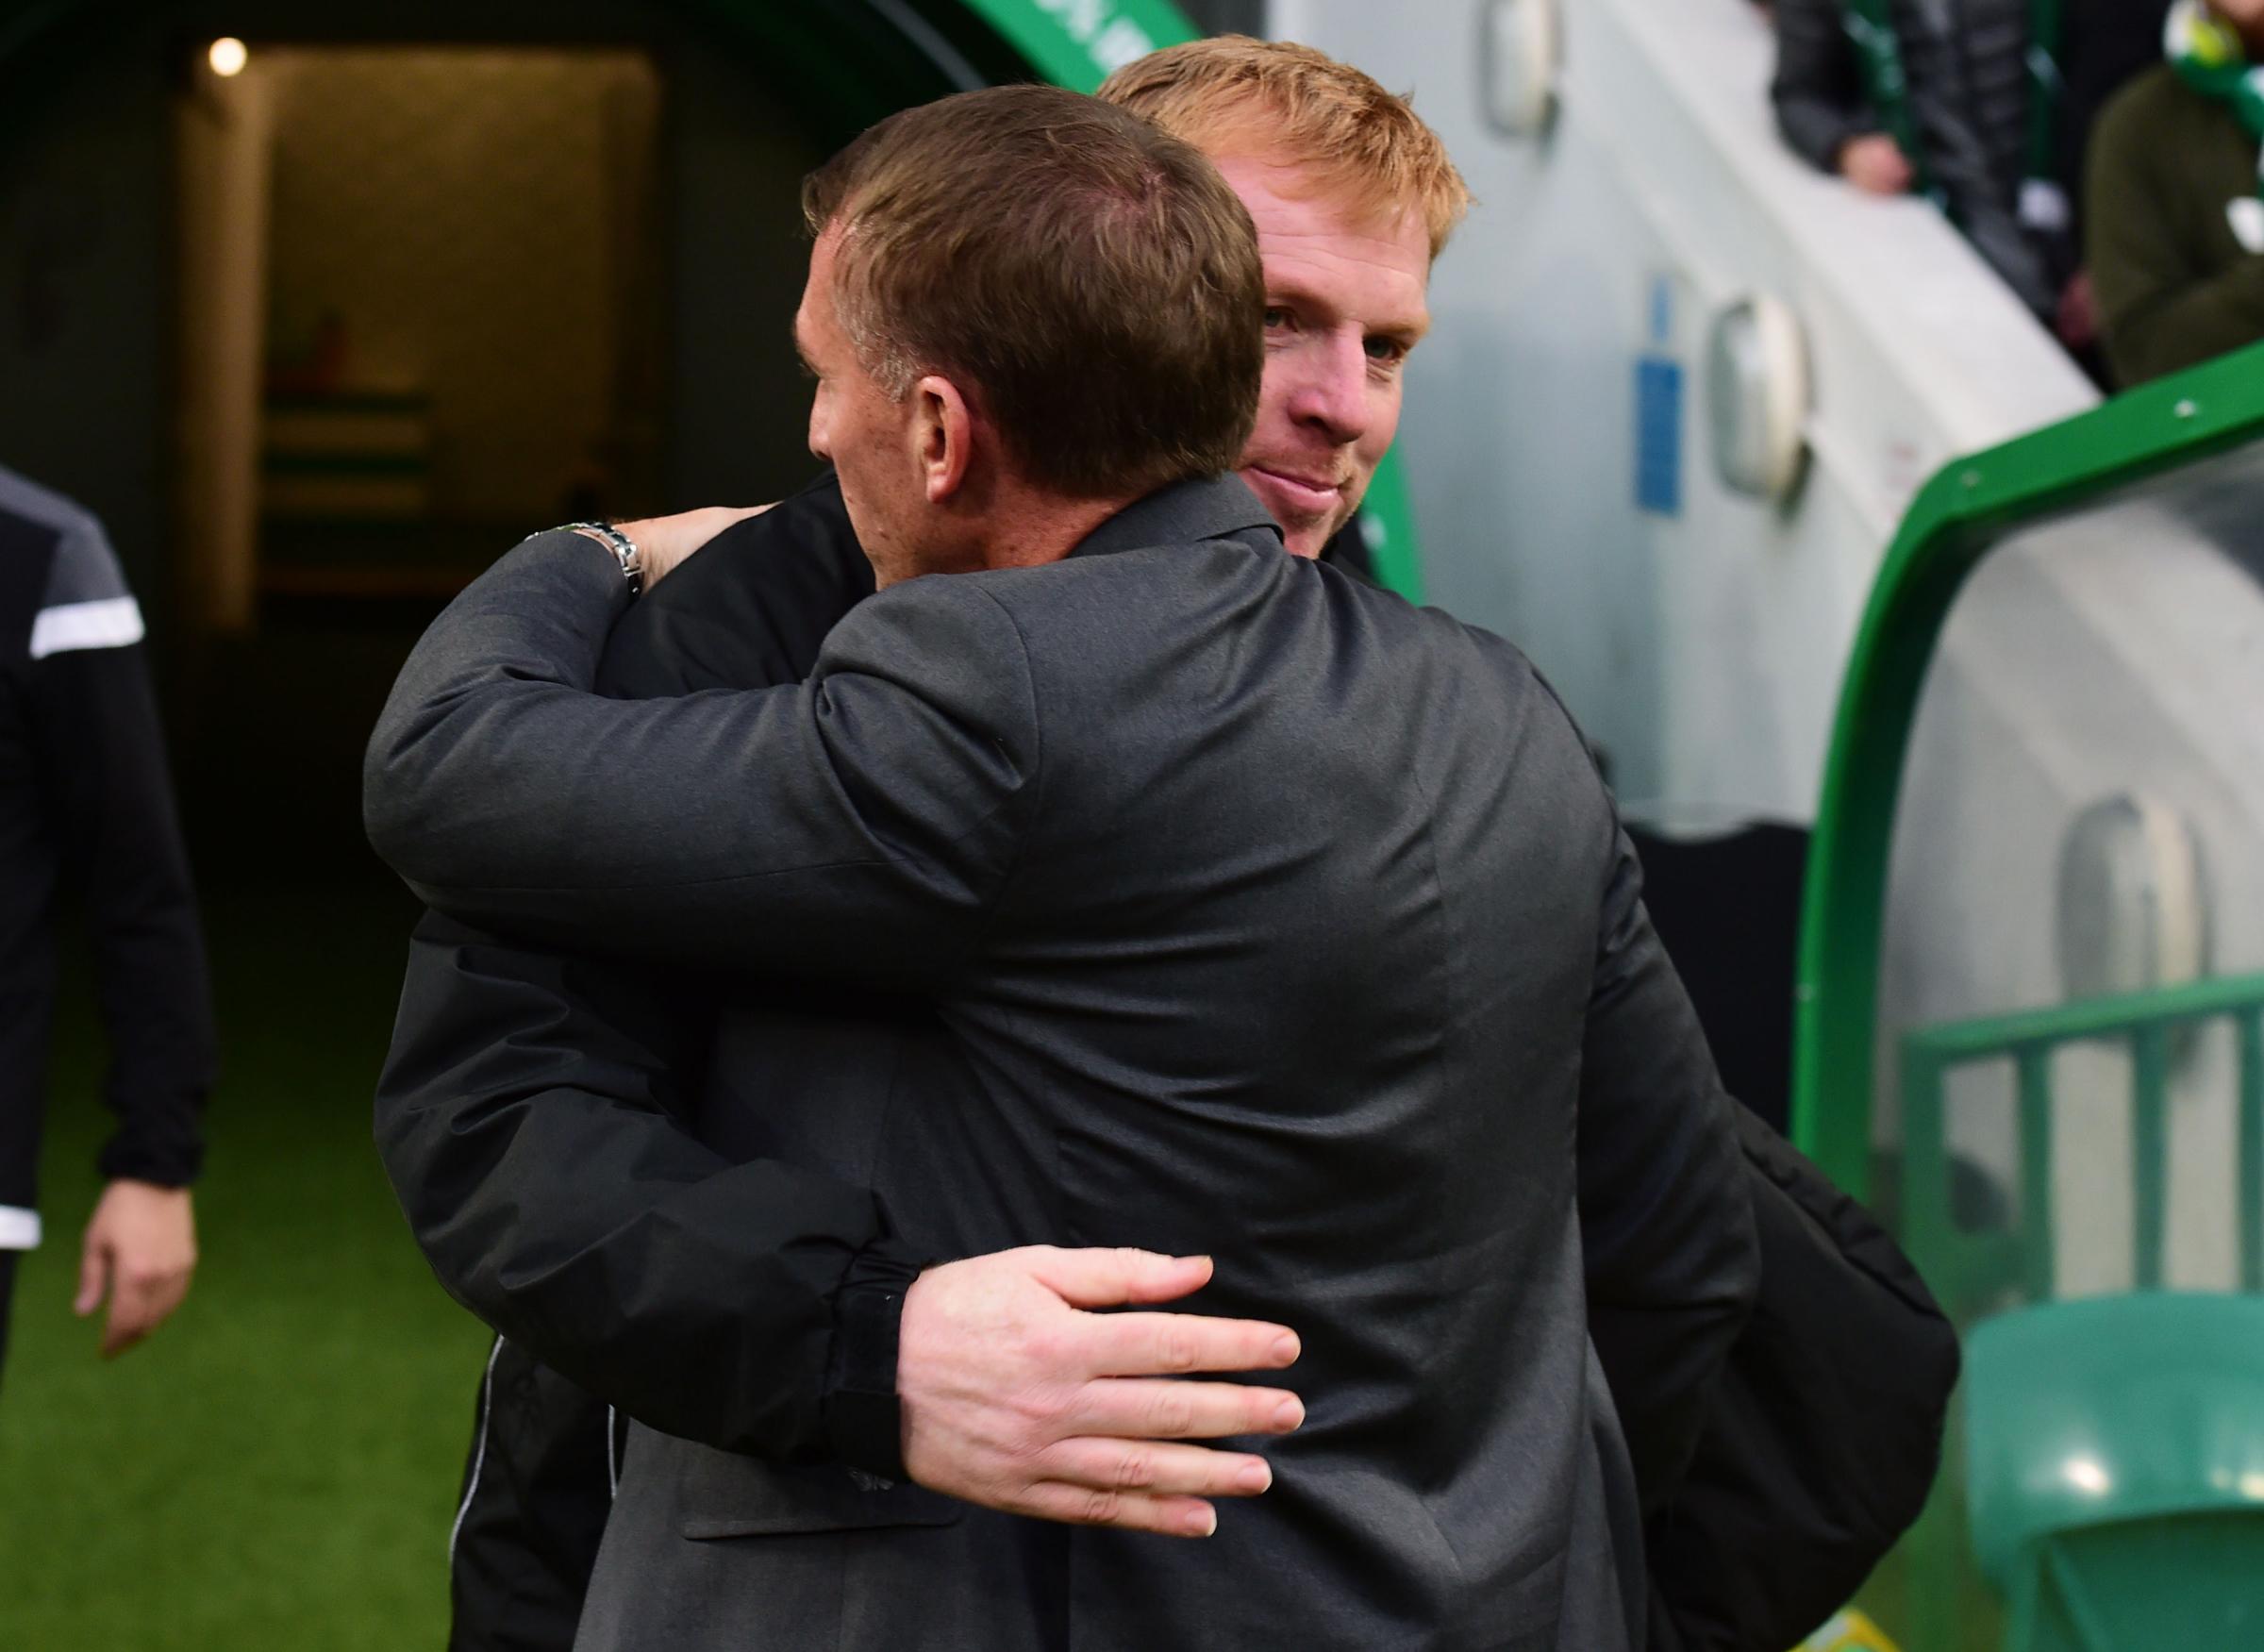 Celtic 4 Hibs 2; six goal thriller as Celtic move into second spot